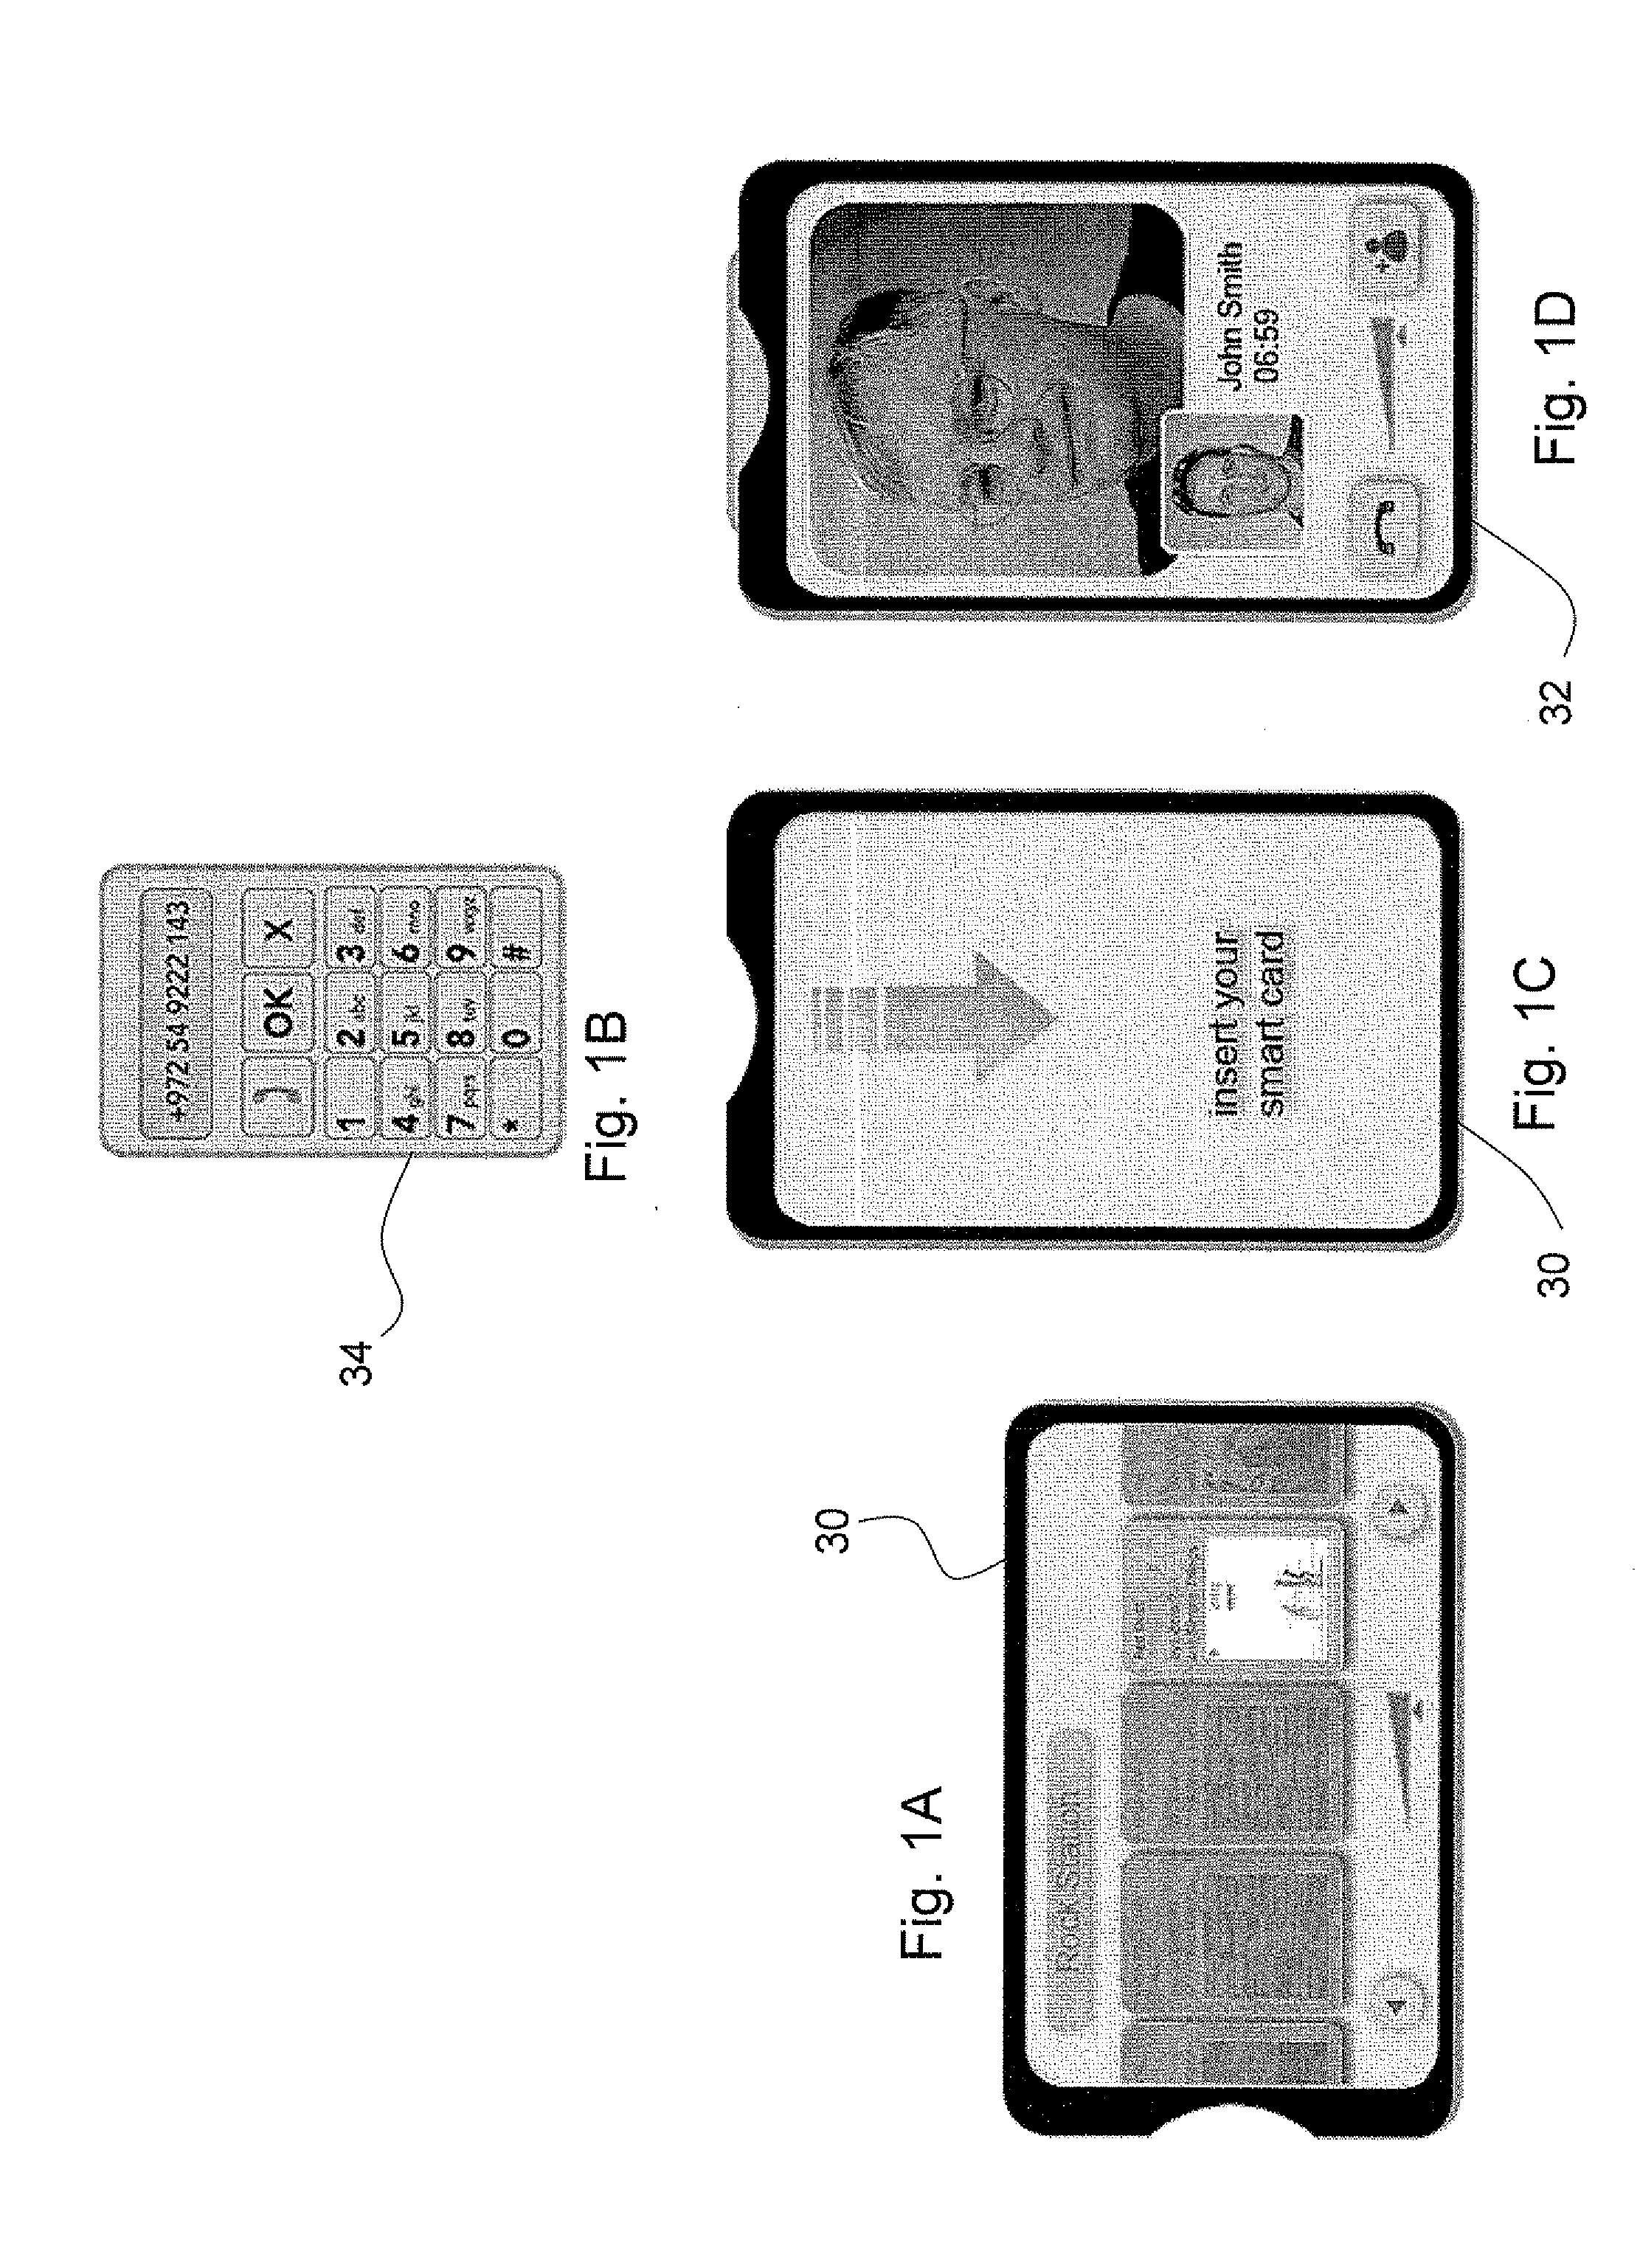 Methods of operating a synergetic tandem pocket device